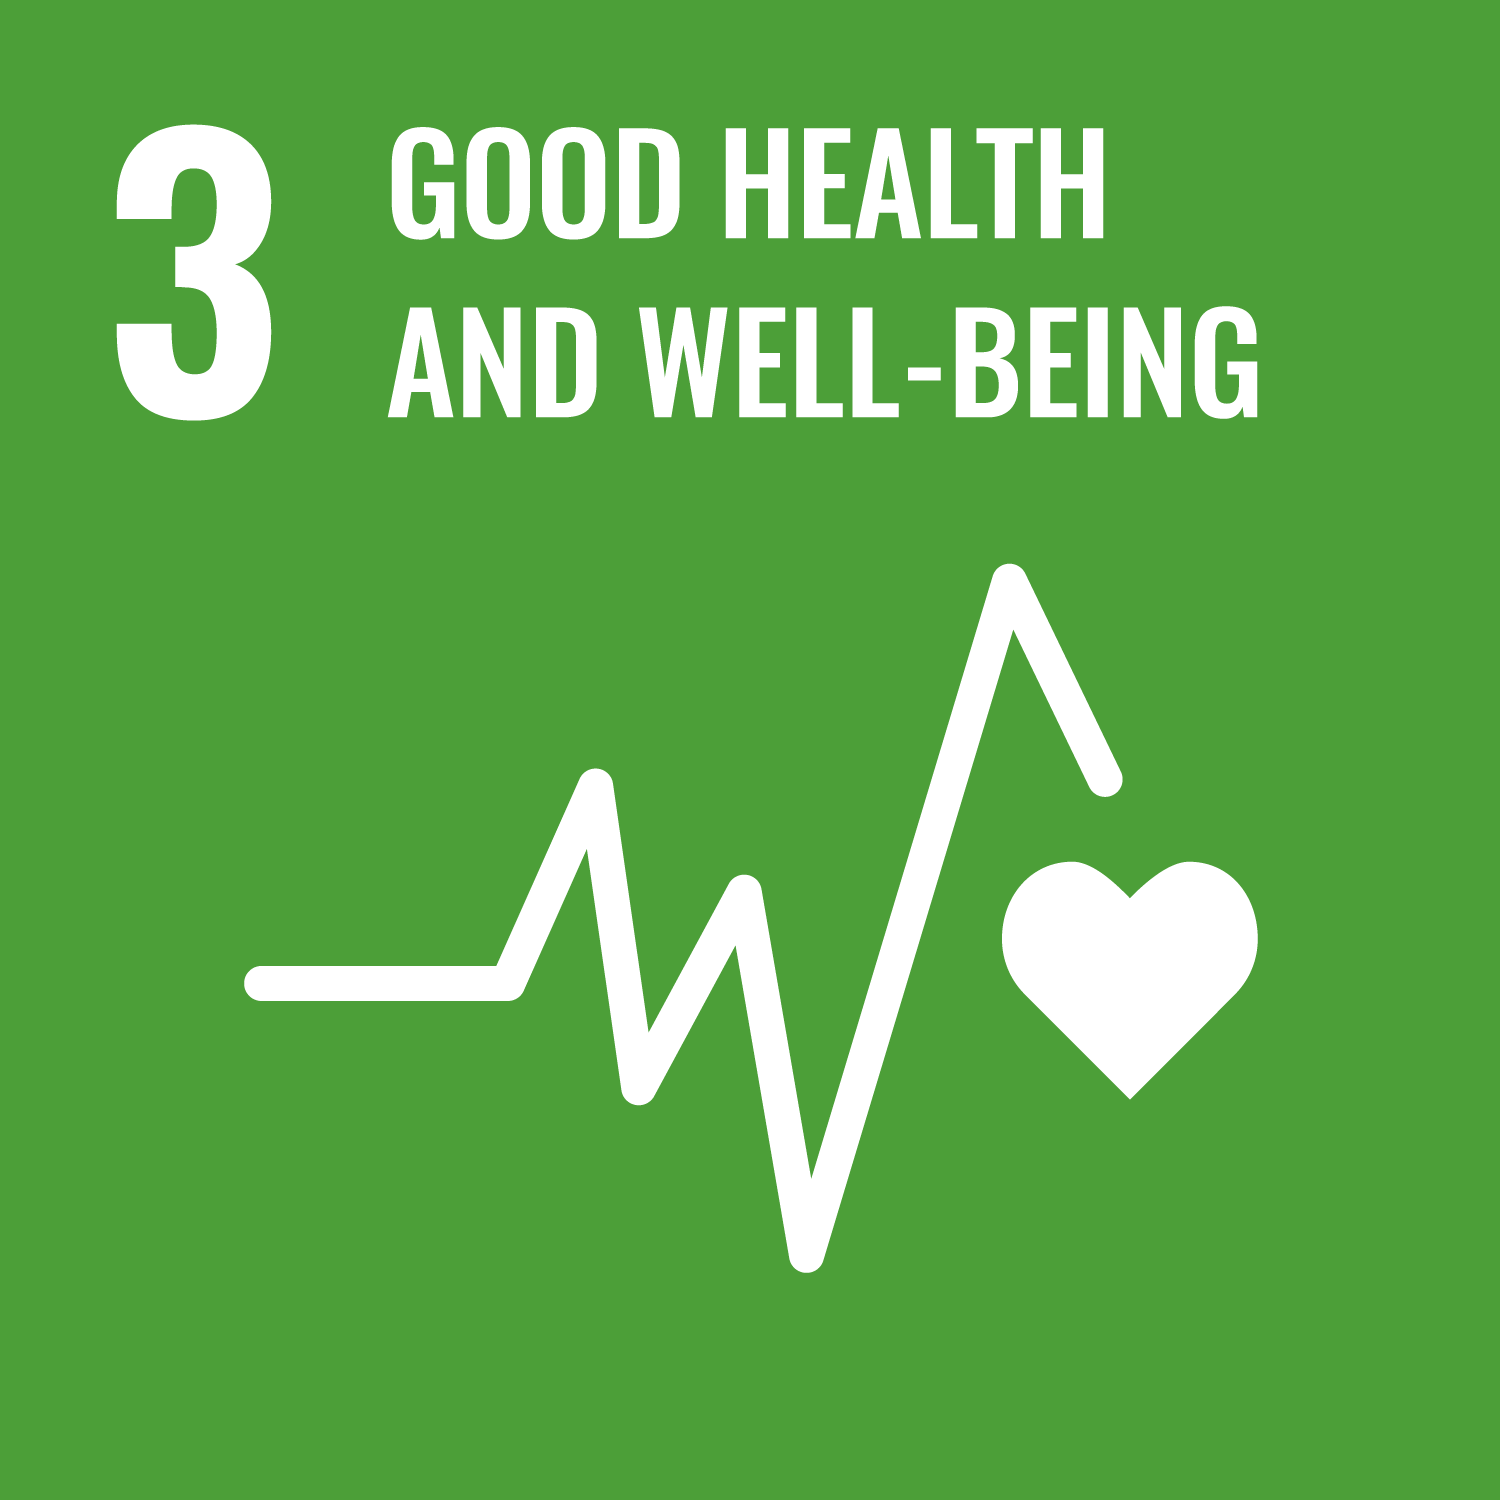 SDG 03 - Good Health and Wellbeing